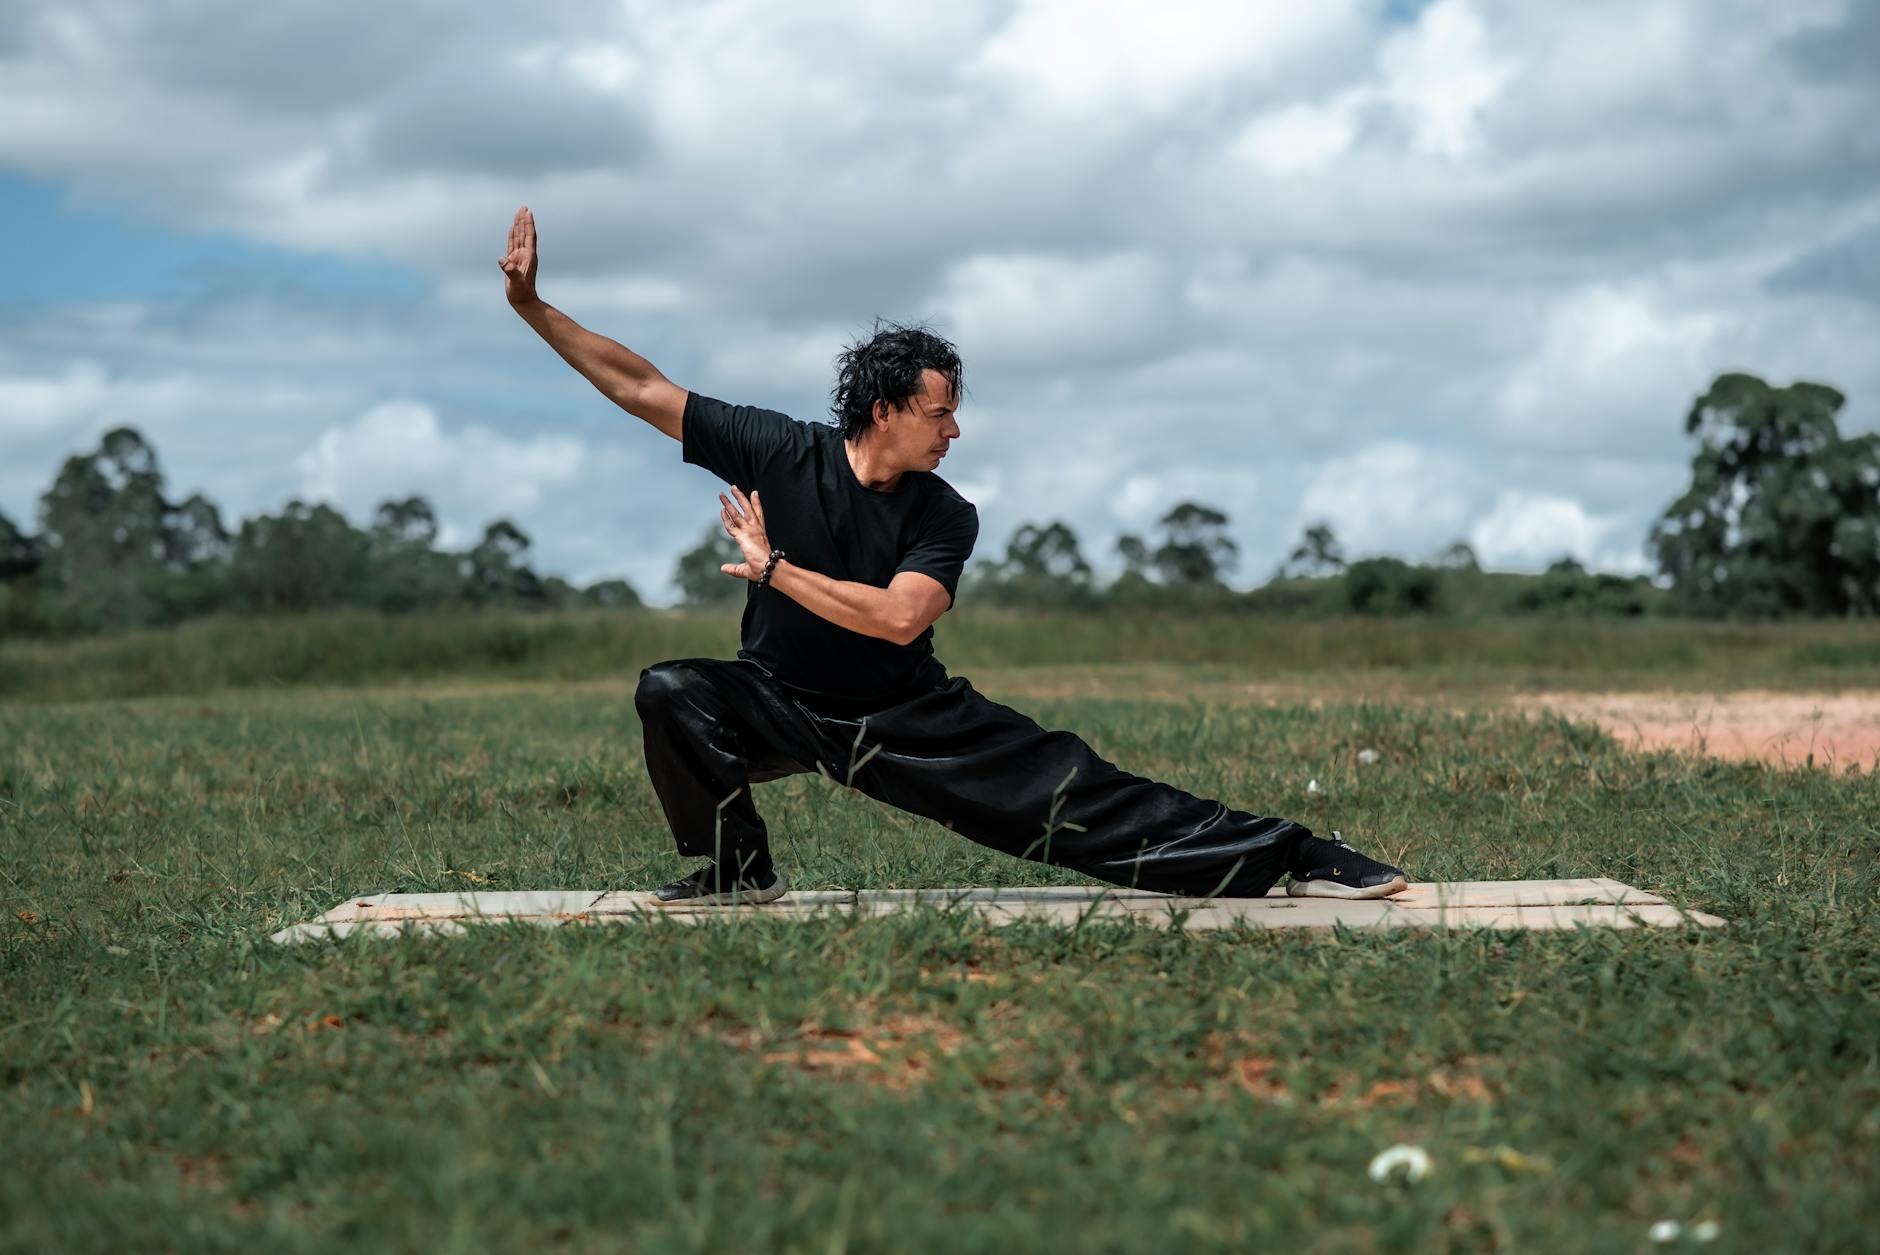 Man in Black Outfit Practicing Tai-chi